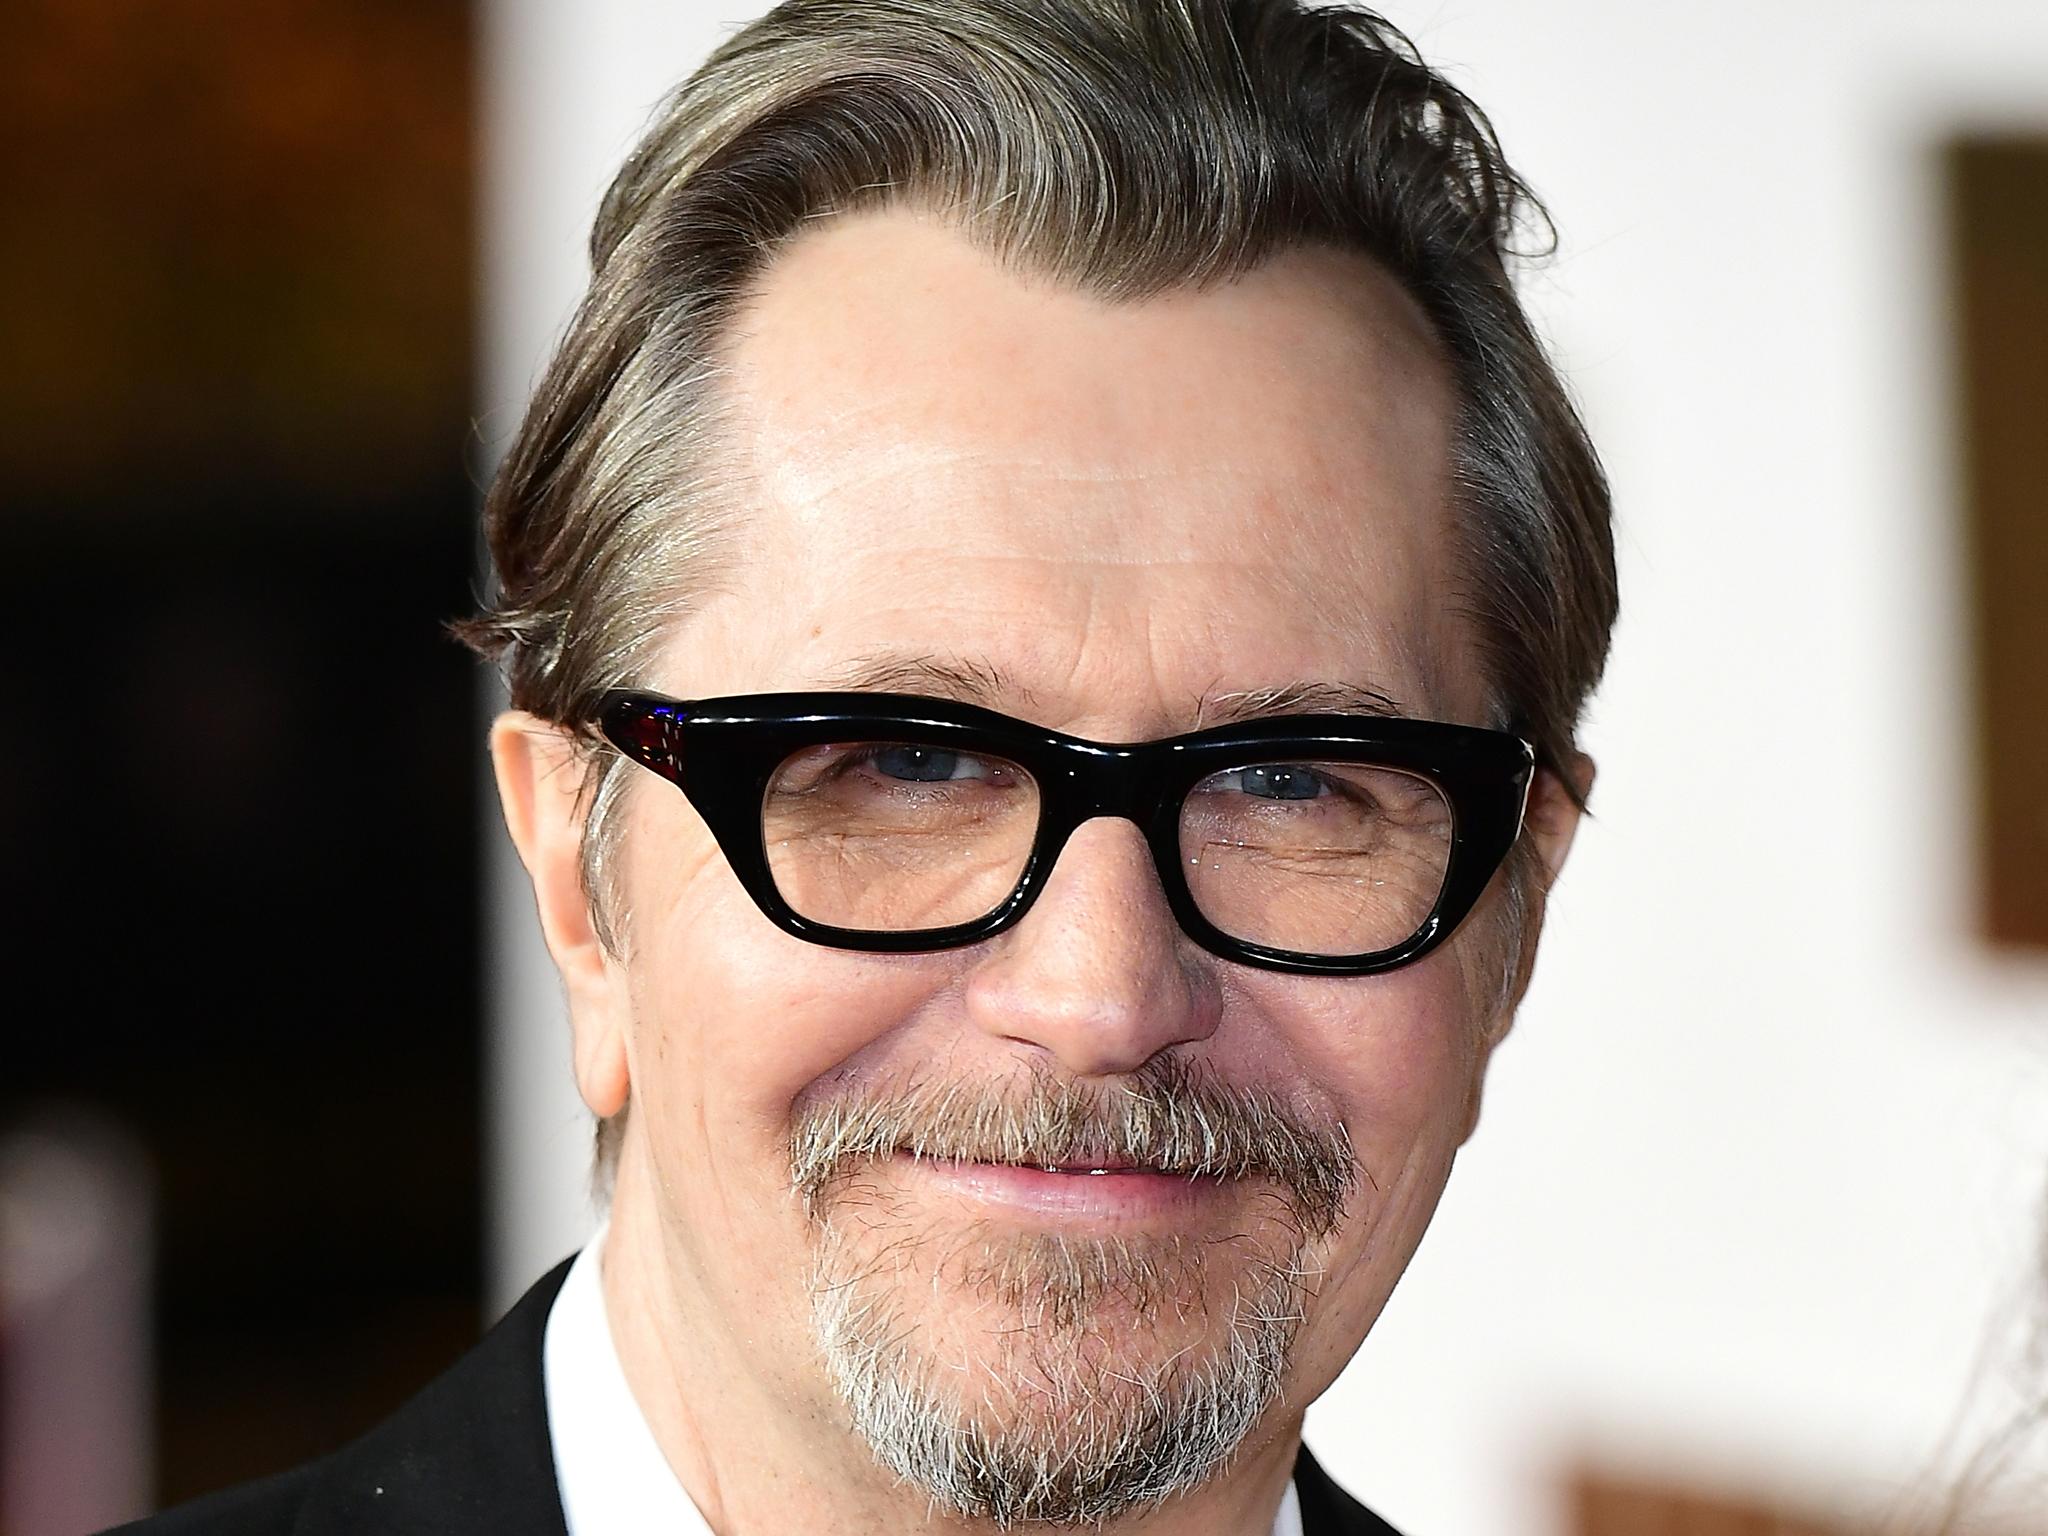 Oldman won Best Actor at the Golden Globes for playing Winston Churchill in Darkest Hour